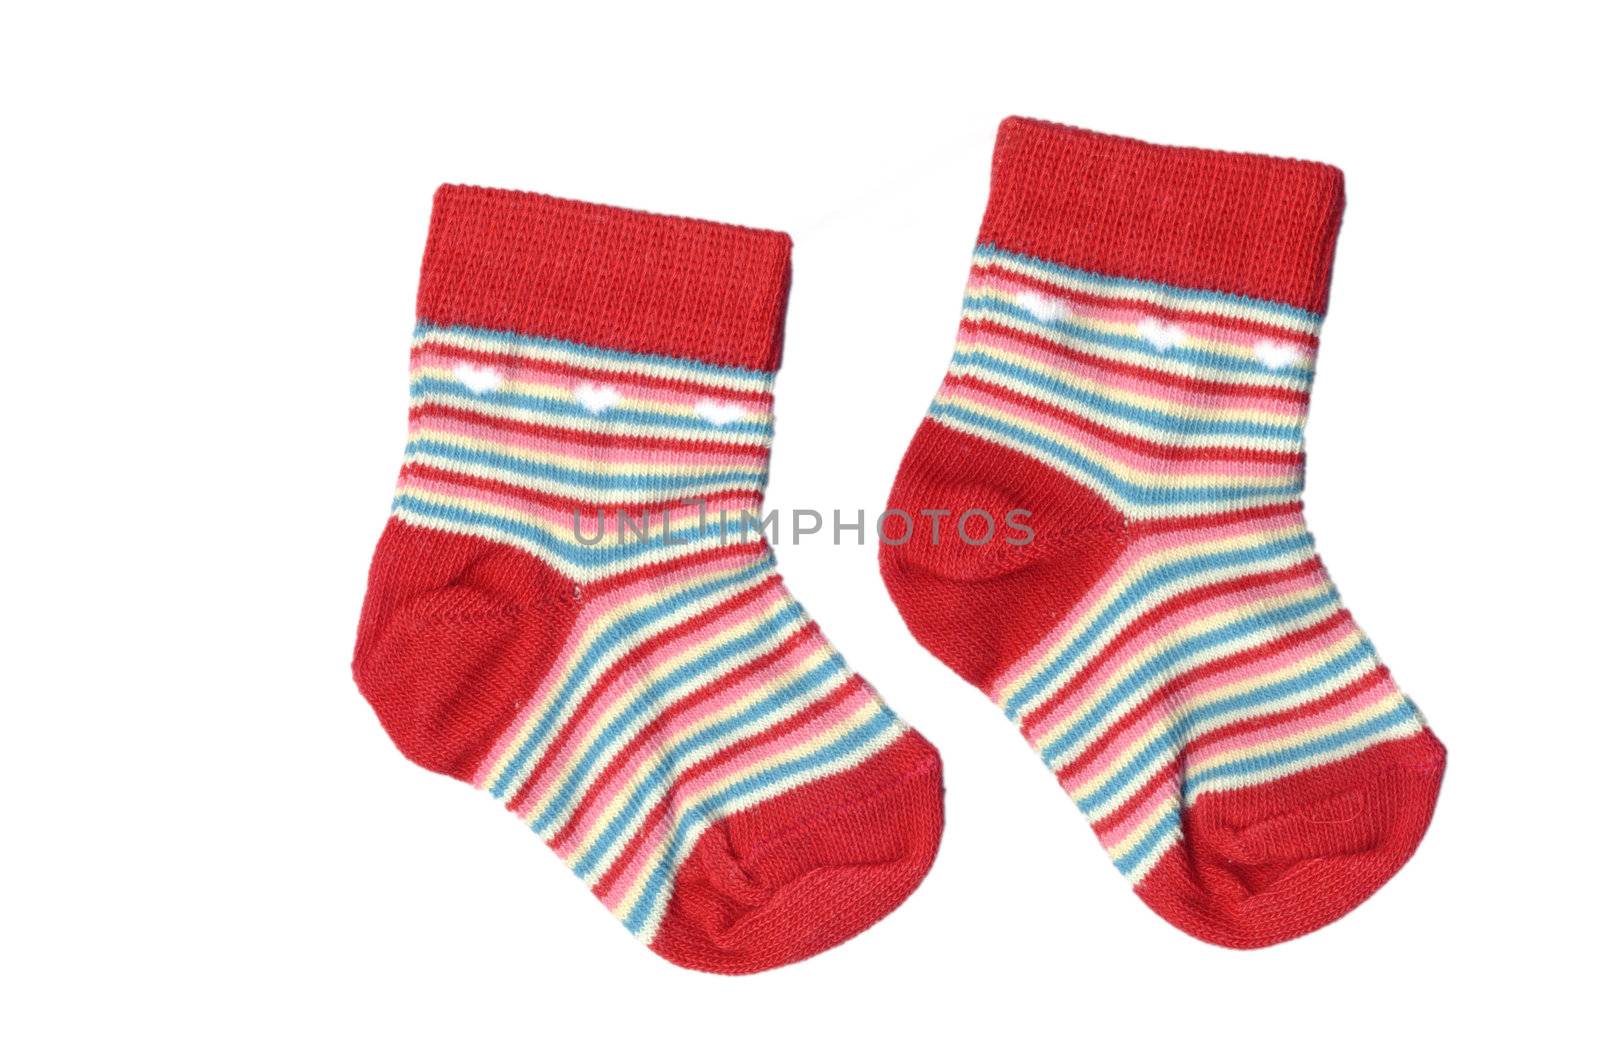 pair of red toddlers socks isolated over white